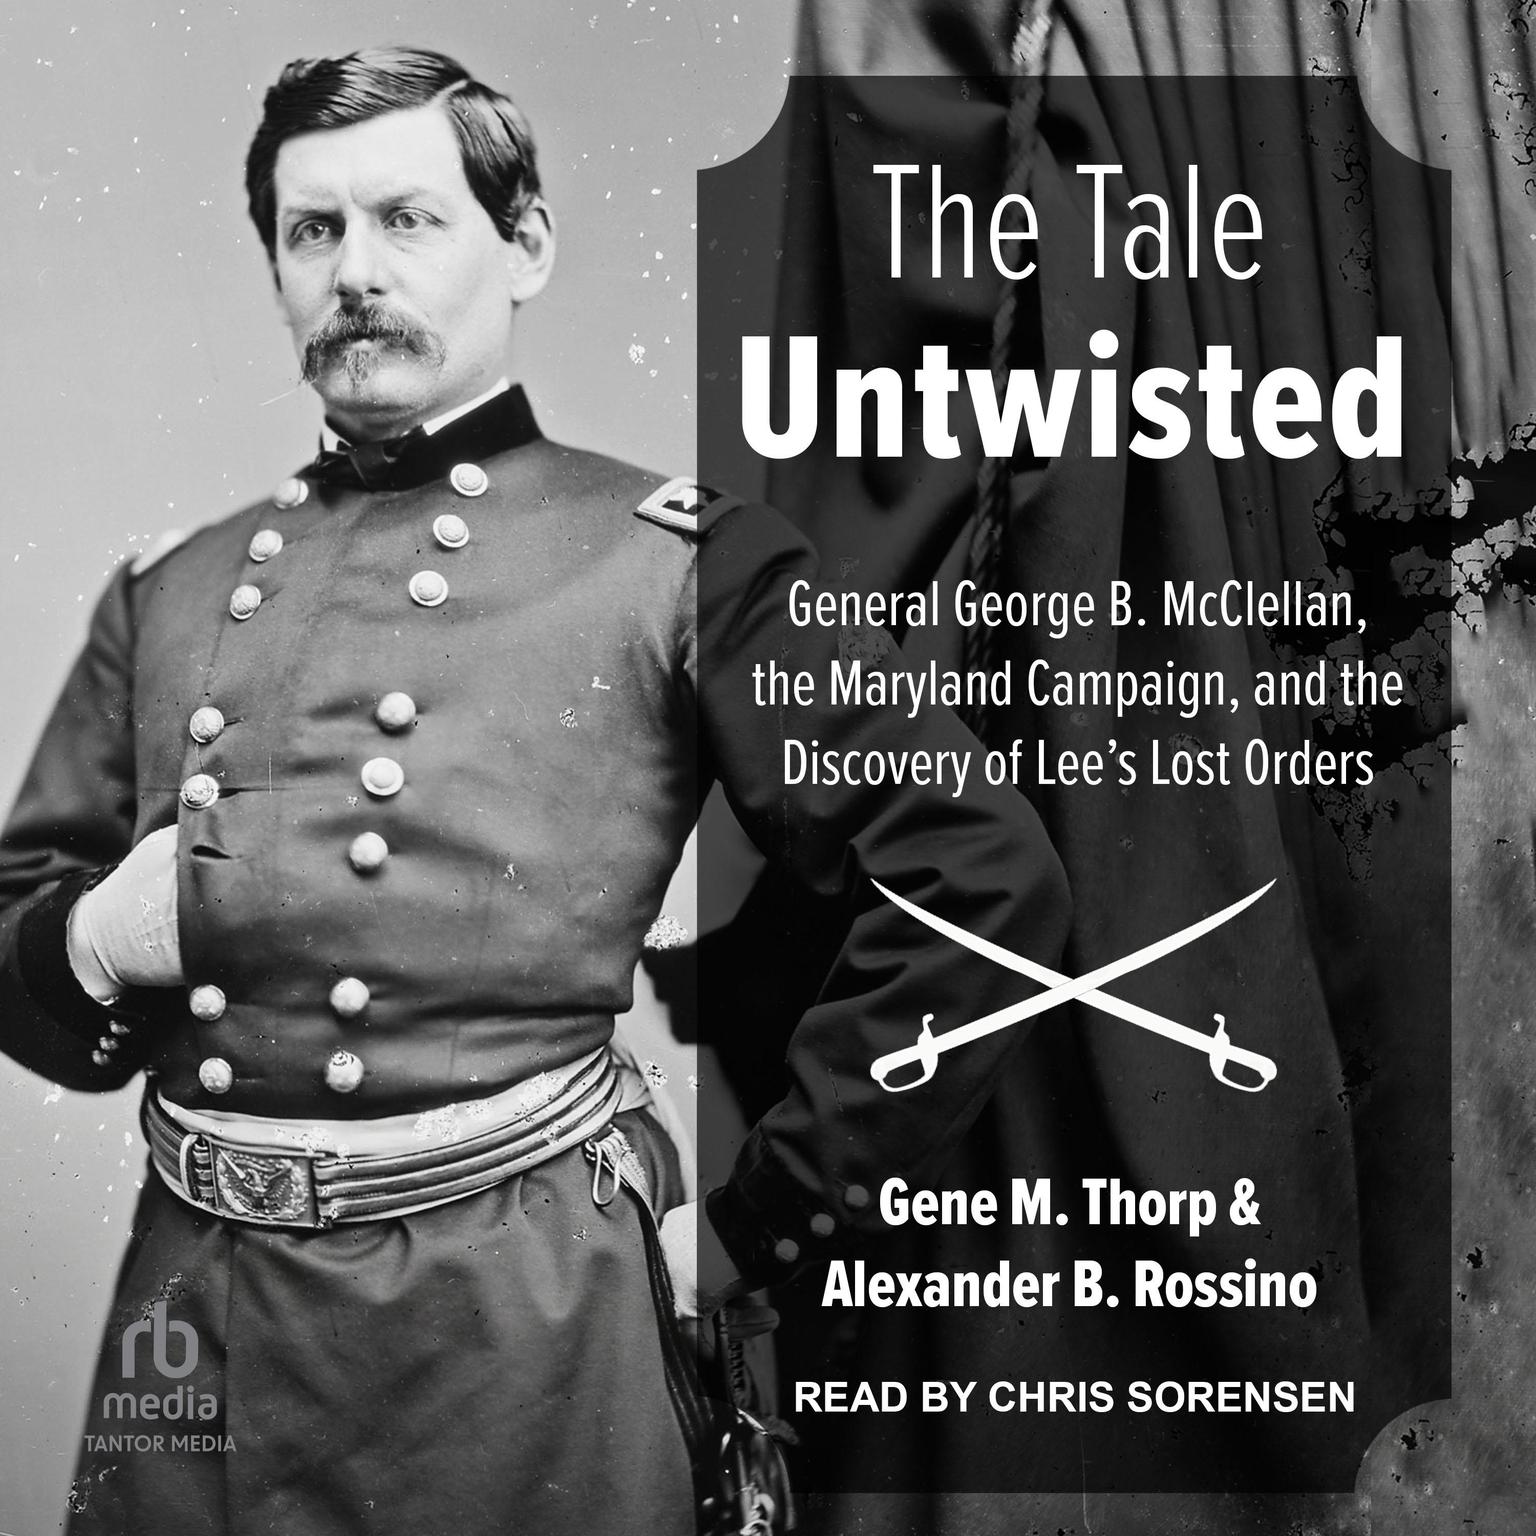 The Tale Untwisted: General George B. McClellan, the Maryland Campaign, and the Discovery of Lees Lost Orders Audiobook, by Alexander B. Rossino